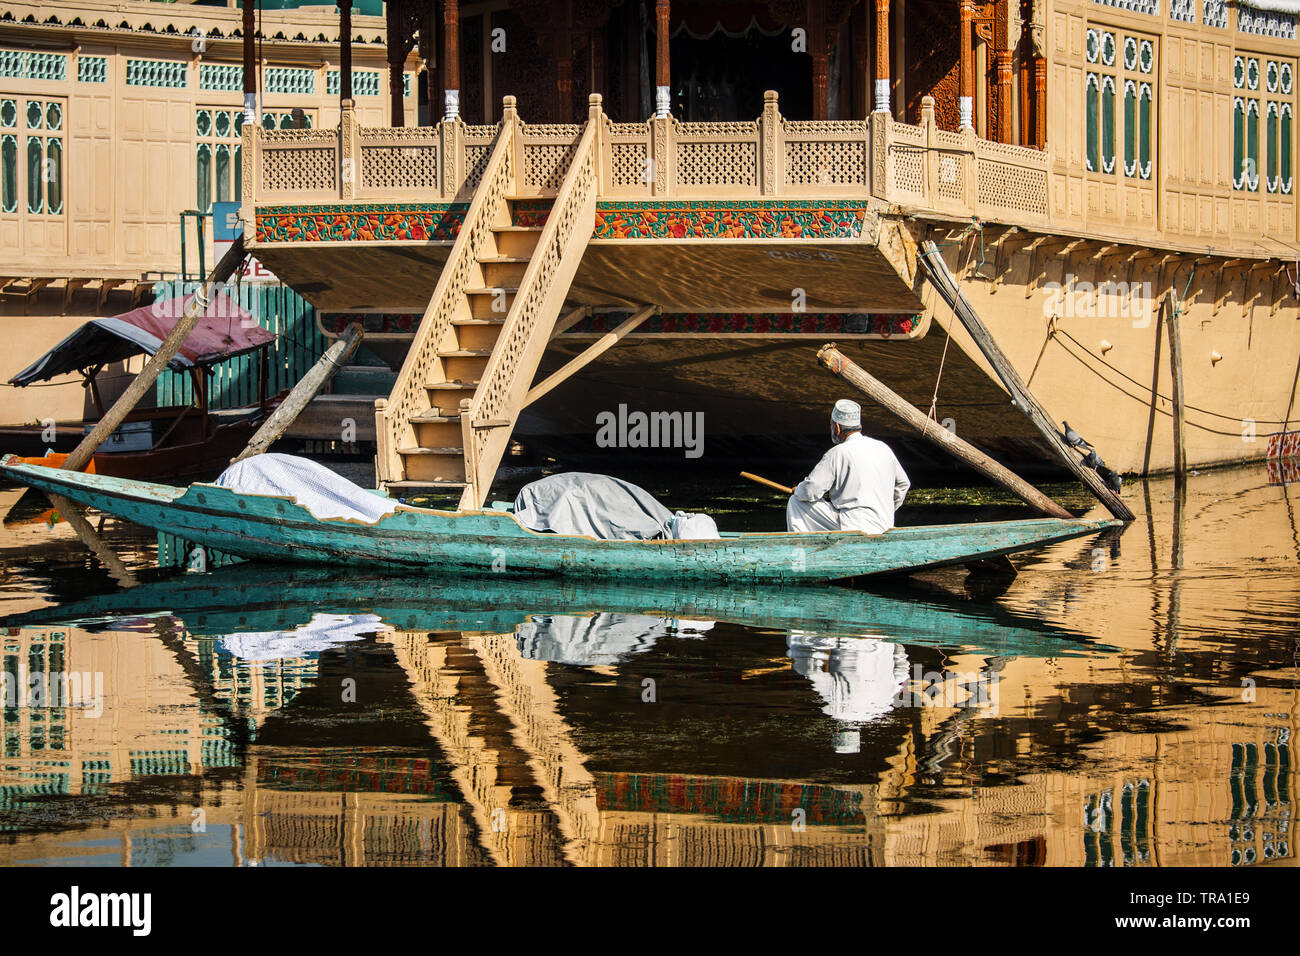 Muslim Man with back to the camera in a long boat rowing beside beautifully ornate houseboats on the famous Dal Lake of Srinagar in the Kashmir Valley Stock Photo